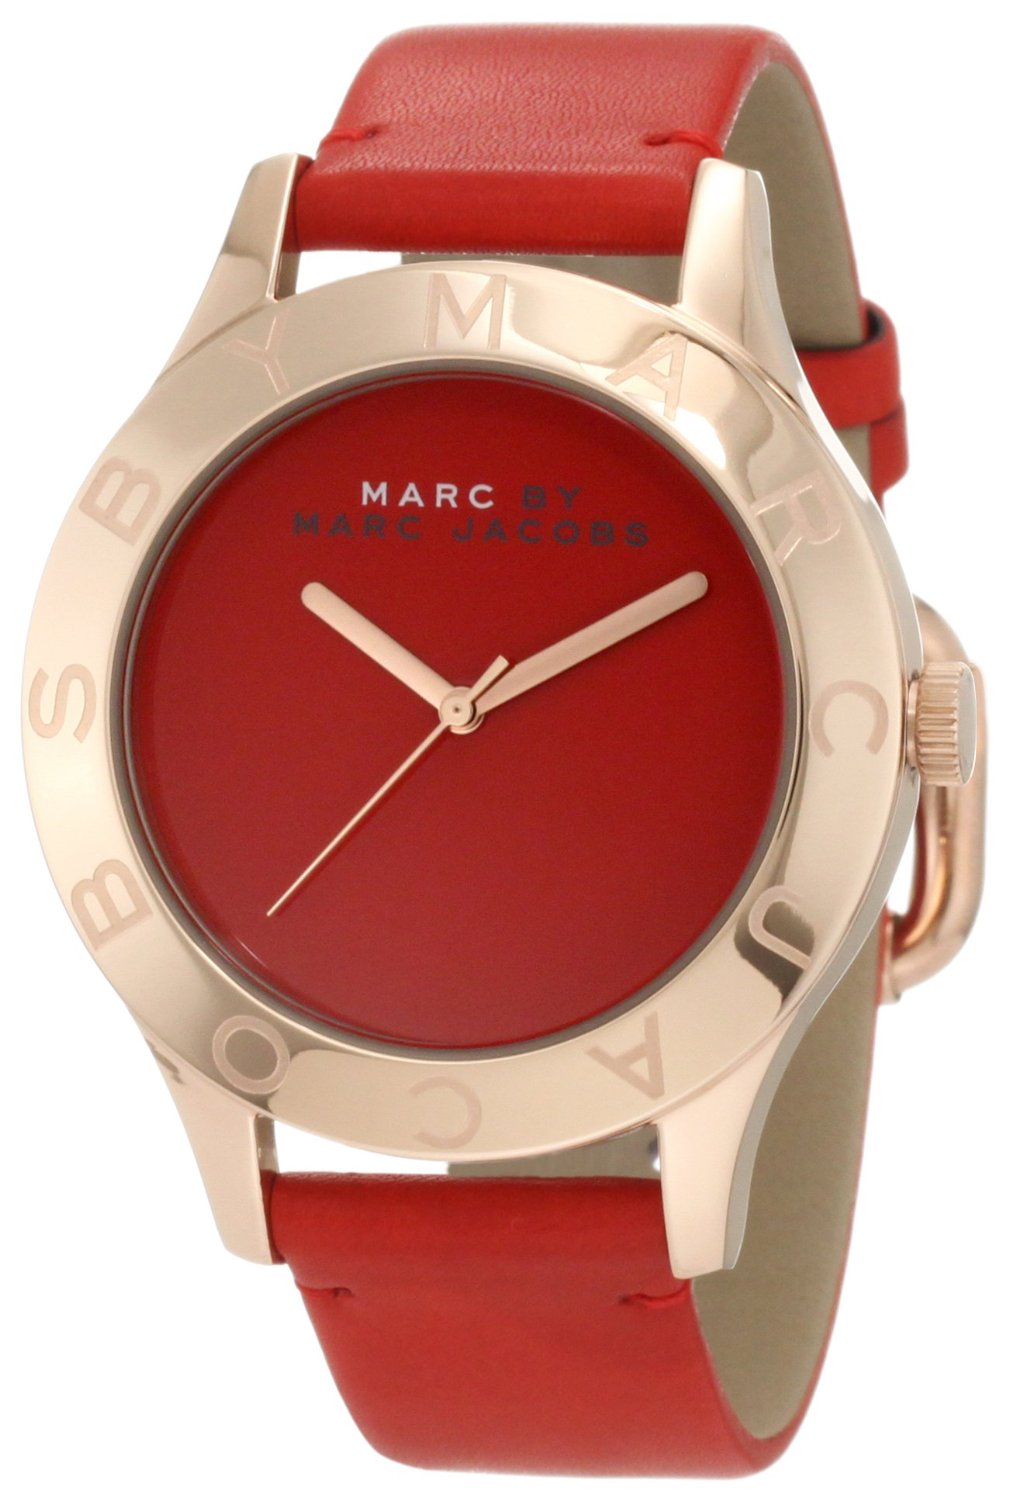 Marc Jacobs Red Watch